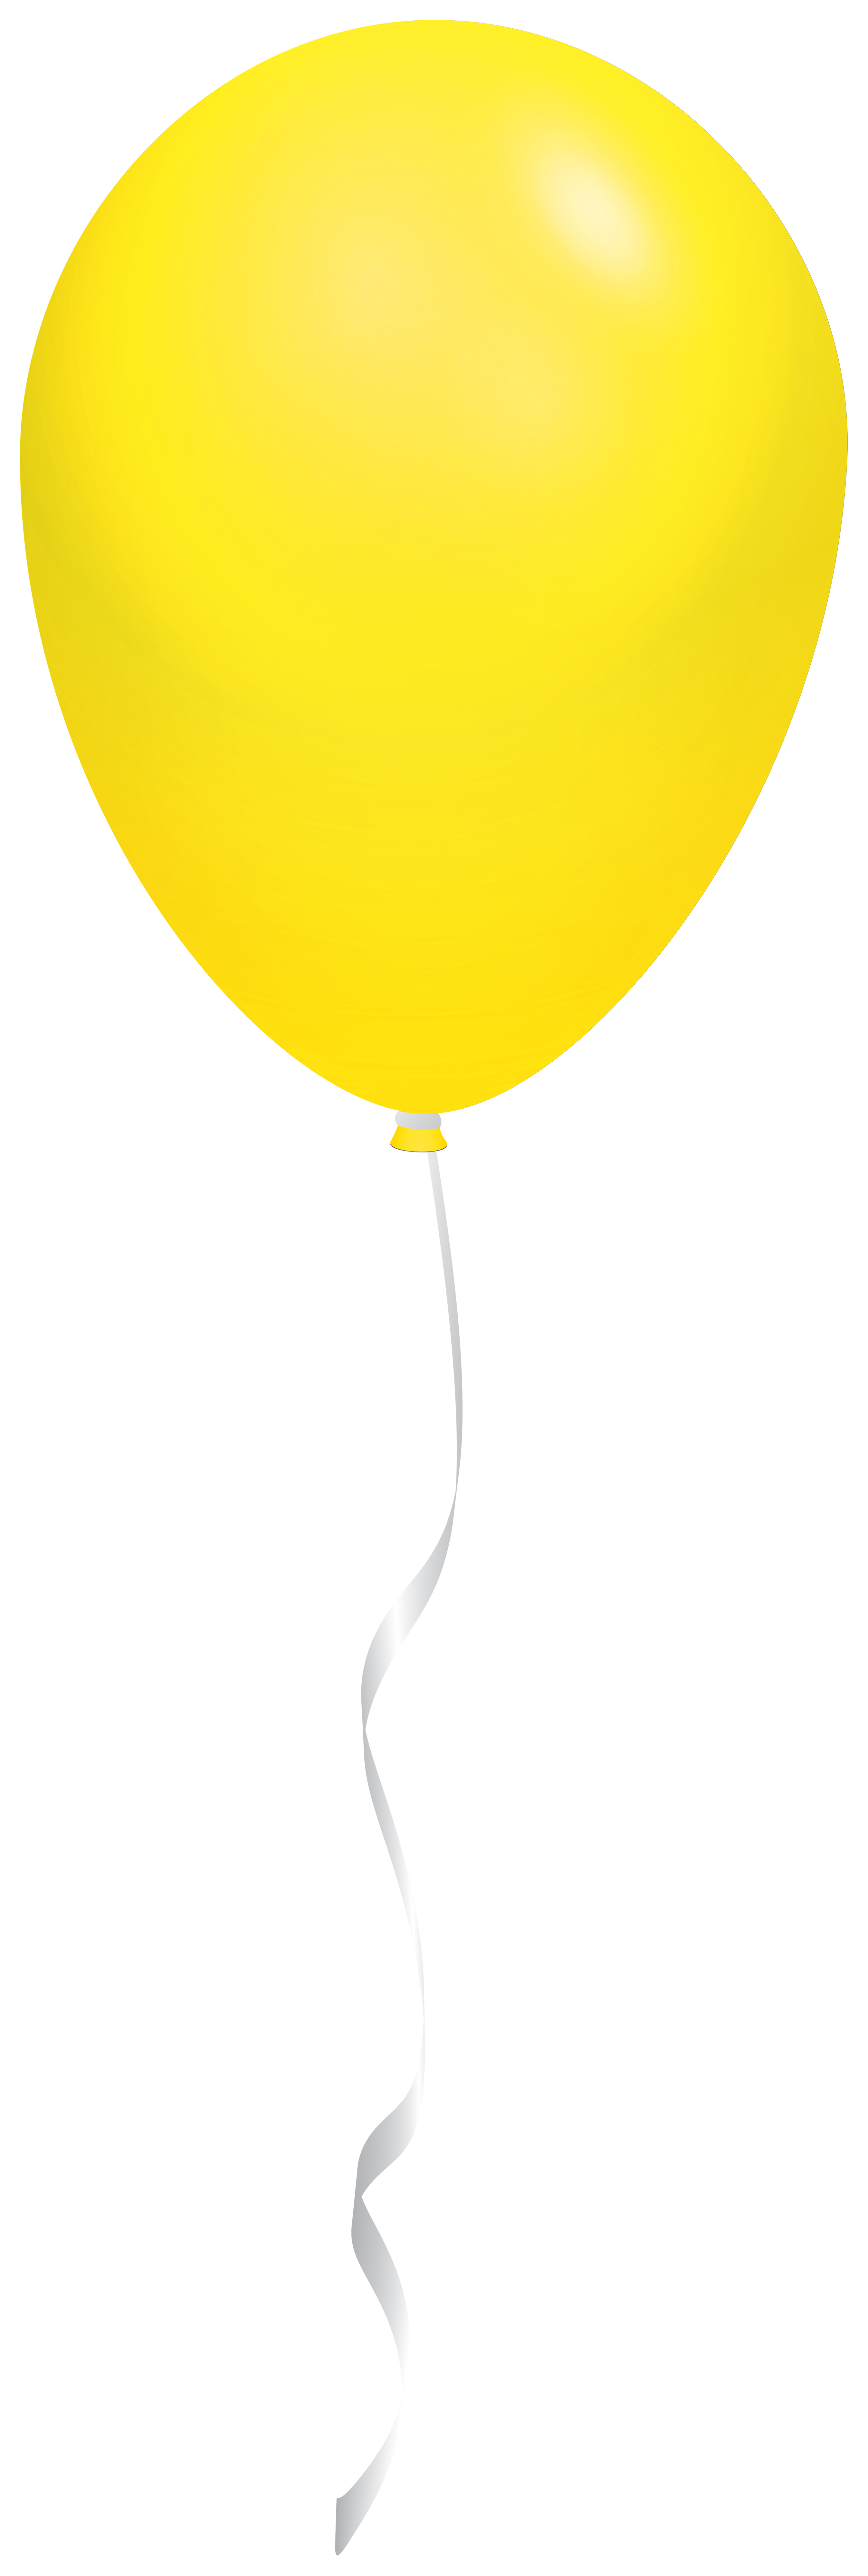 Single Yellow Balloon Transparent Png Clipart Gallery Yopriceville High Quality Images And Transparent Png Free Clipart